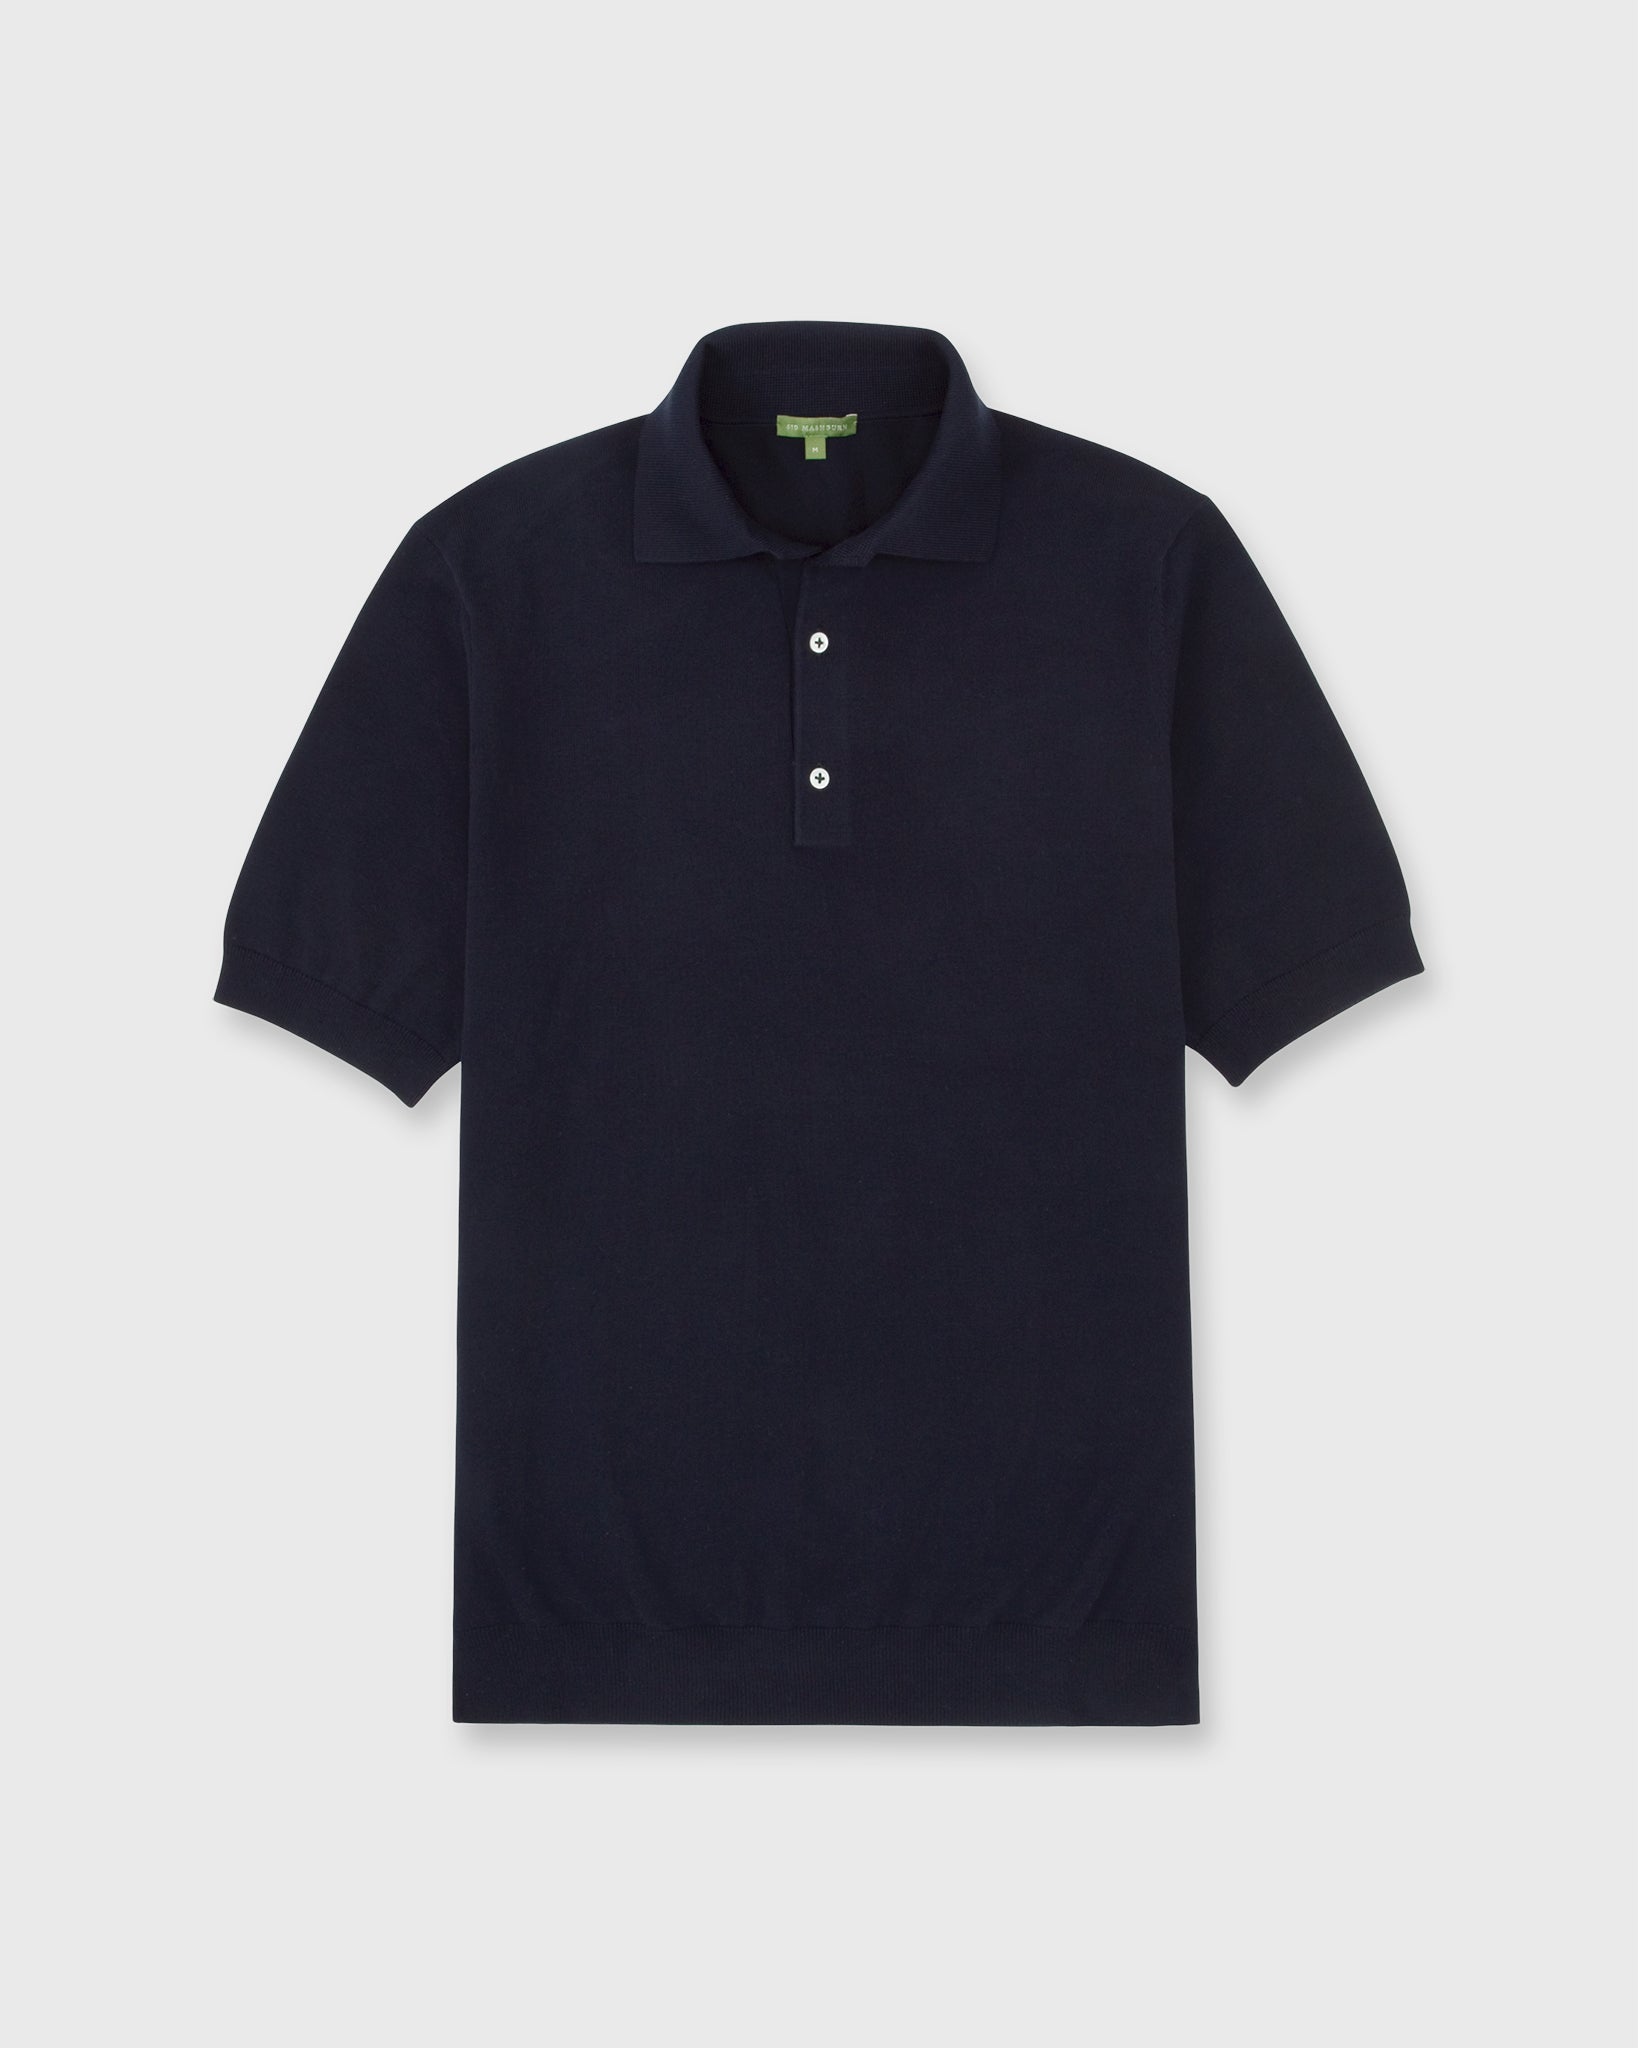 Hyannis Polo Sweater in Navy Cotton